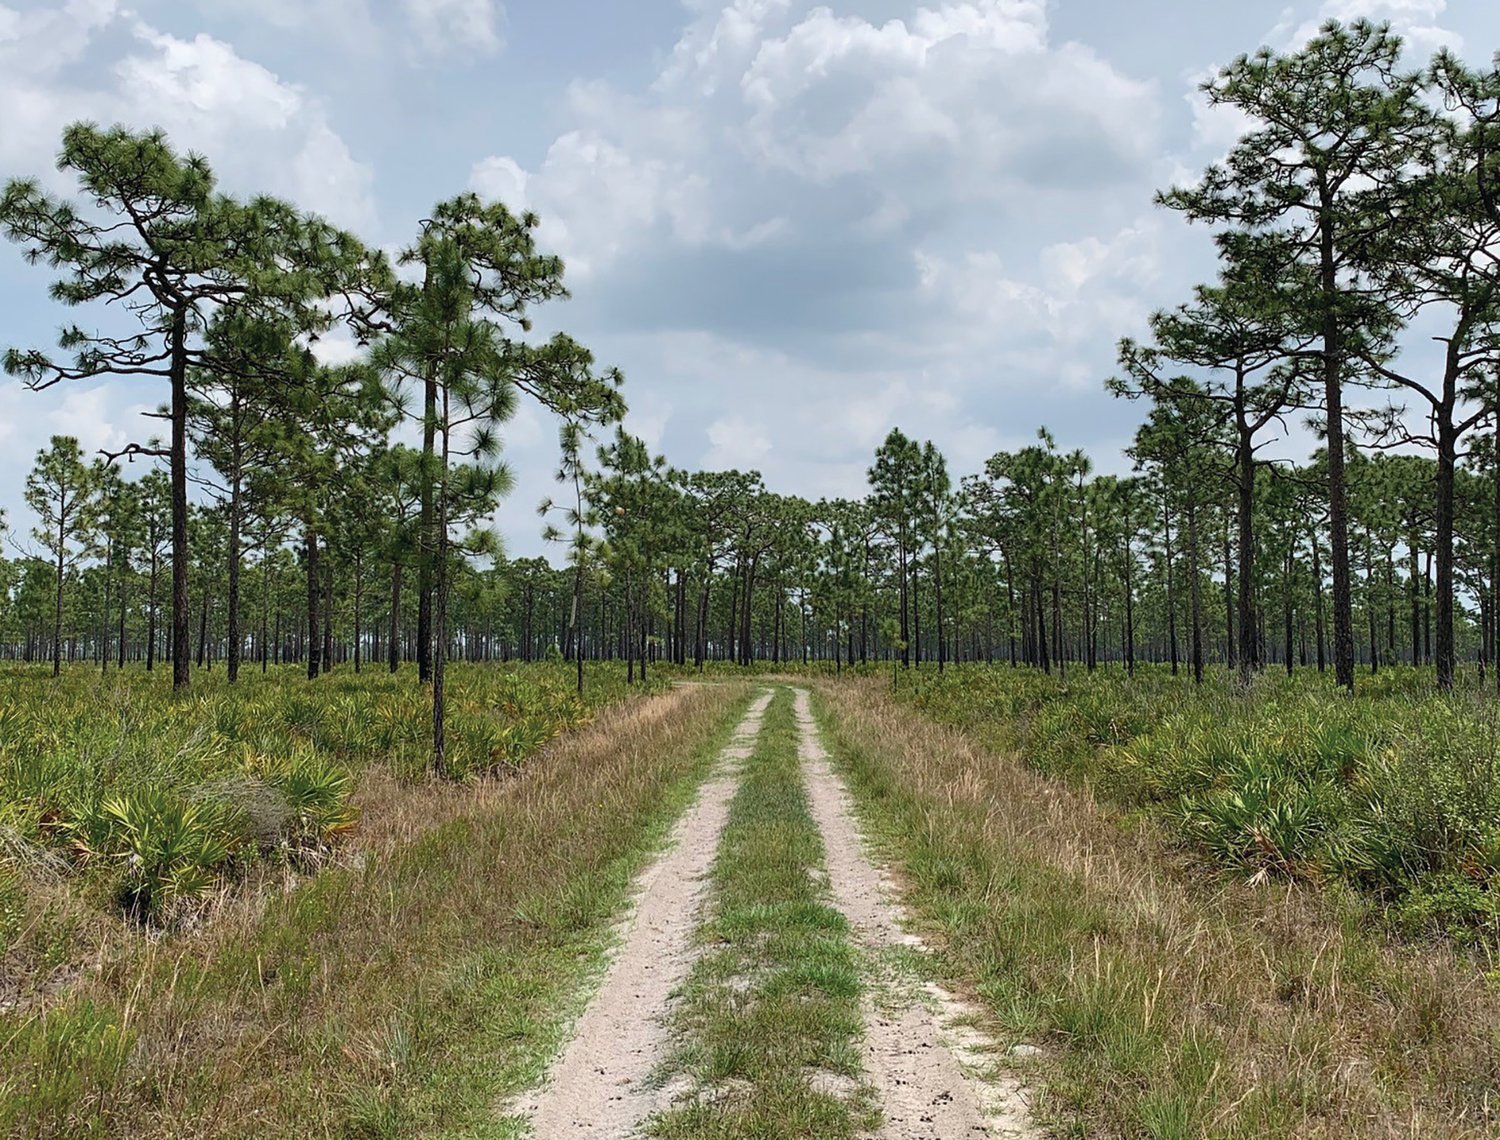 Longleaf pine saplings were more likely to be found in areas dominated by turkey oaks or in forest gaps rather than under mature longleaf pine trees.